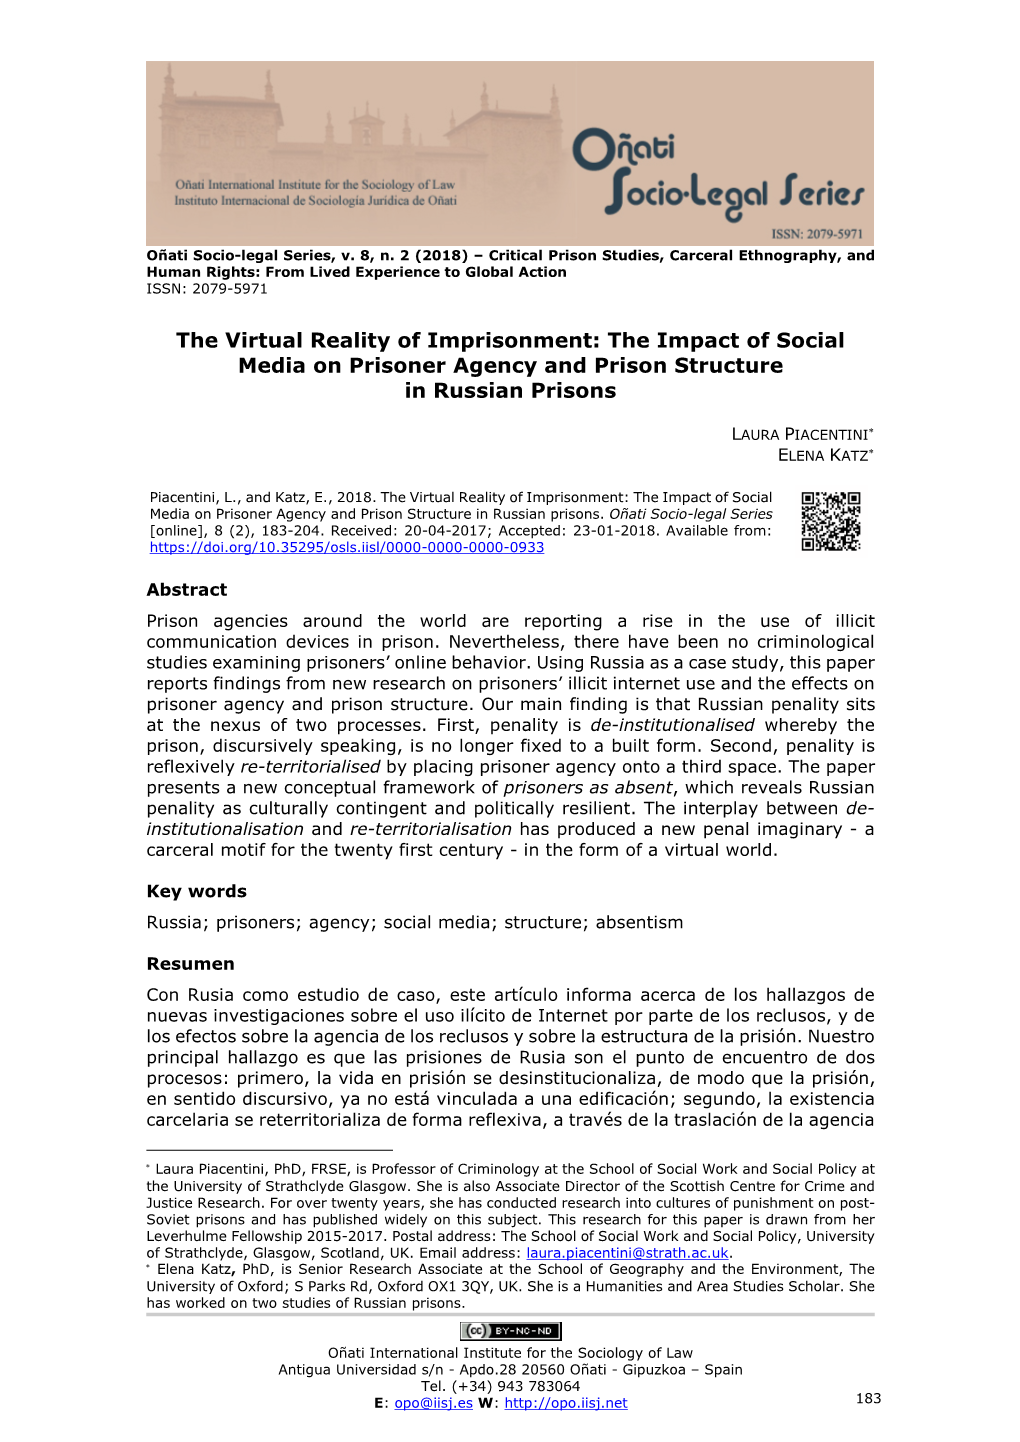 The Impact of Social Media on Prisoner Agency and Prison Structure in Russian Prisons